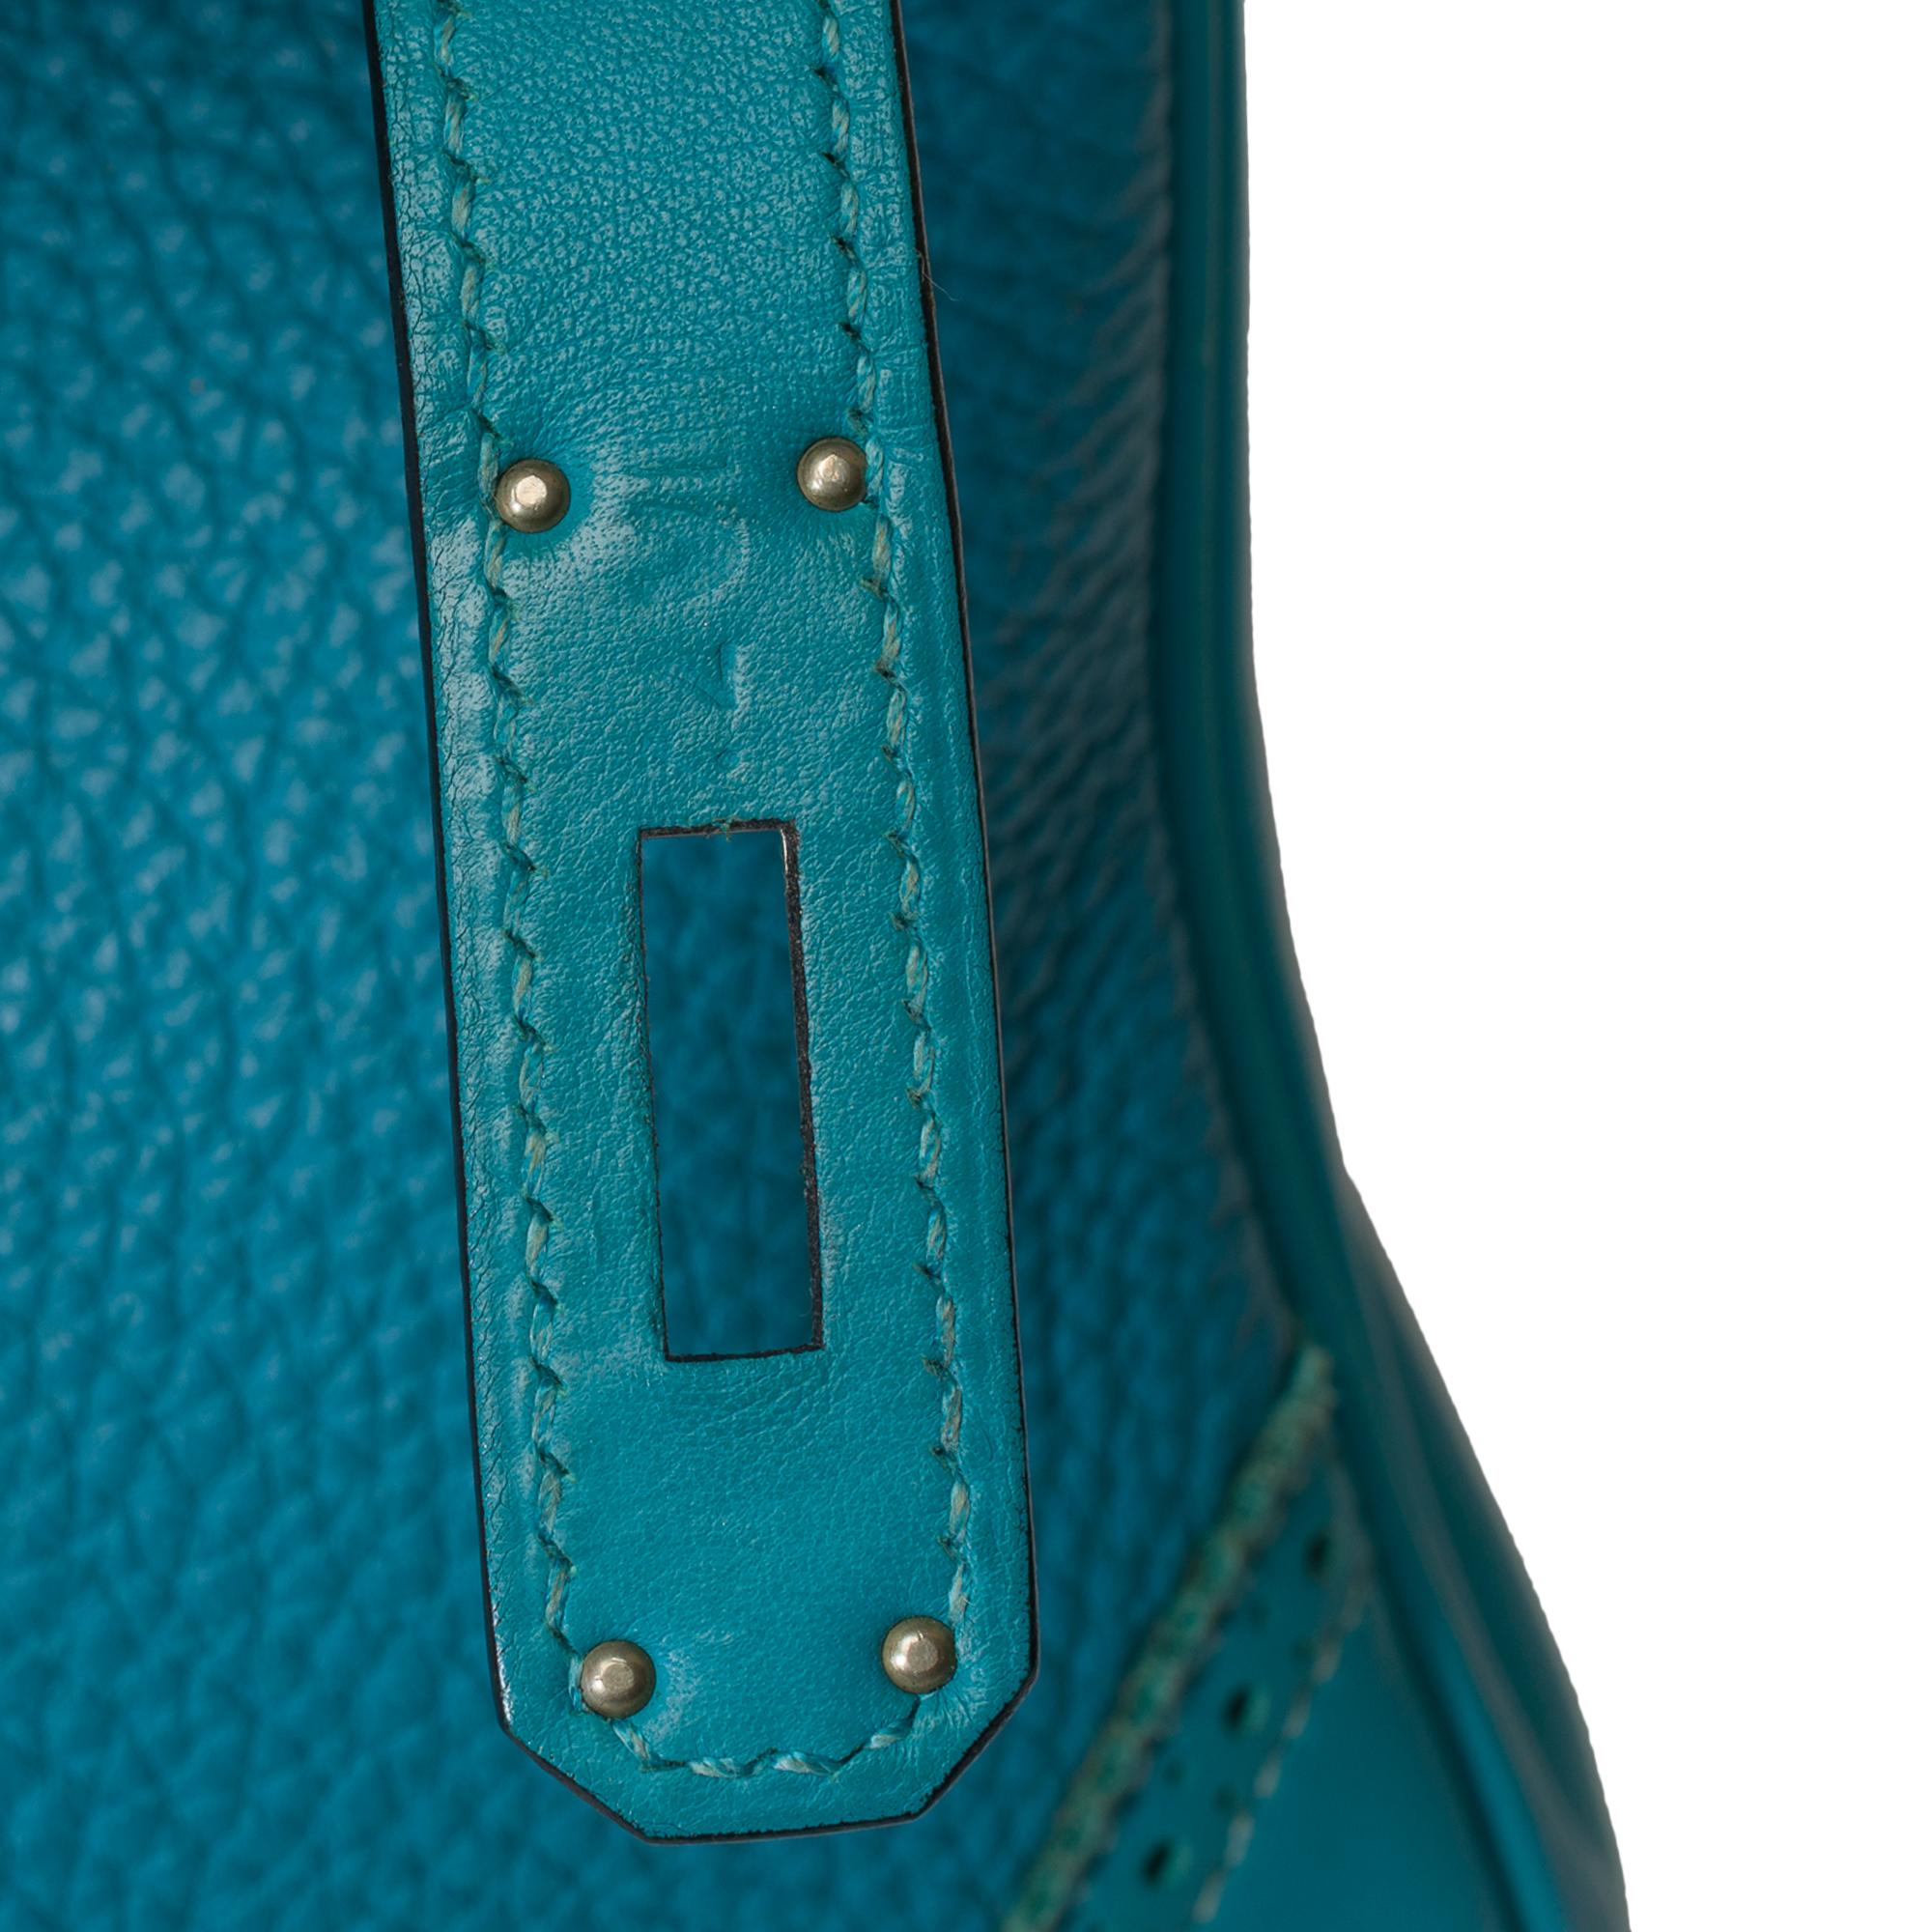 Ghillies Limited Edition Hermes Birkin 30 handbag in Turquoise Blue leather, SHW For Sale 5